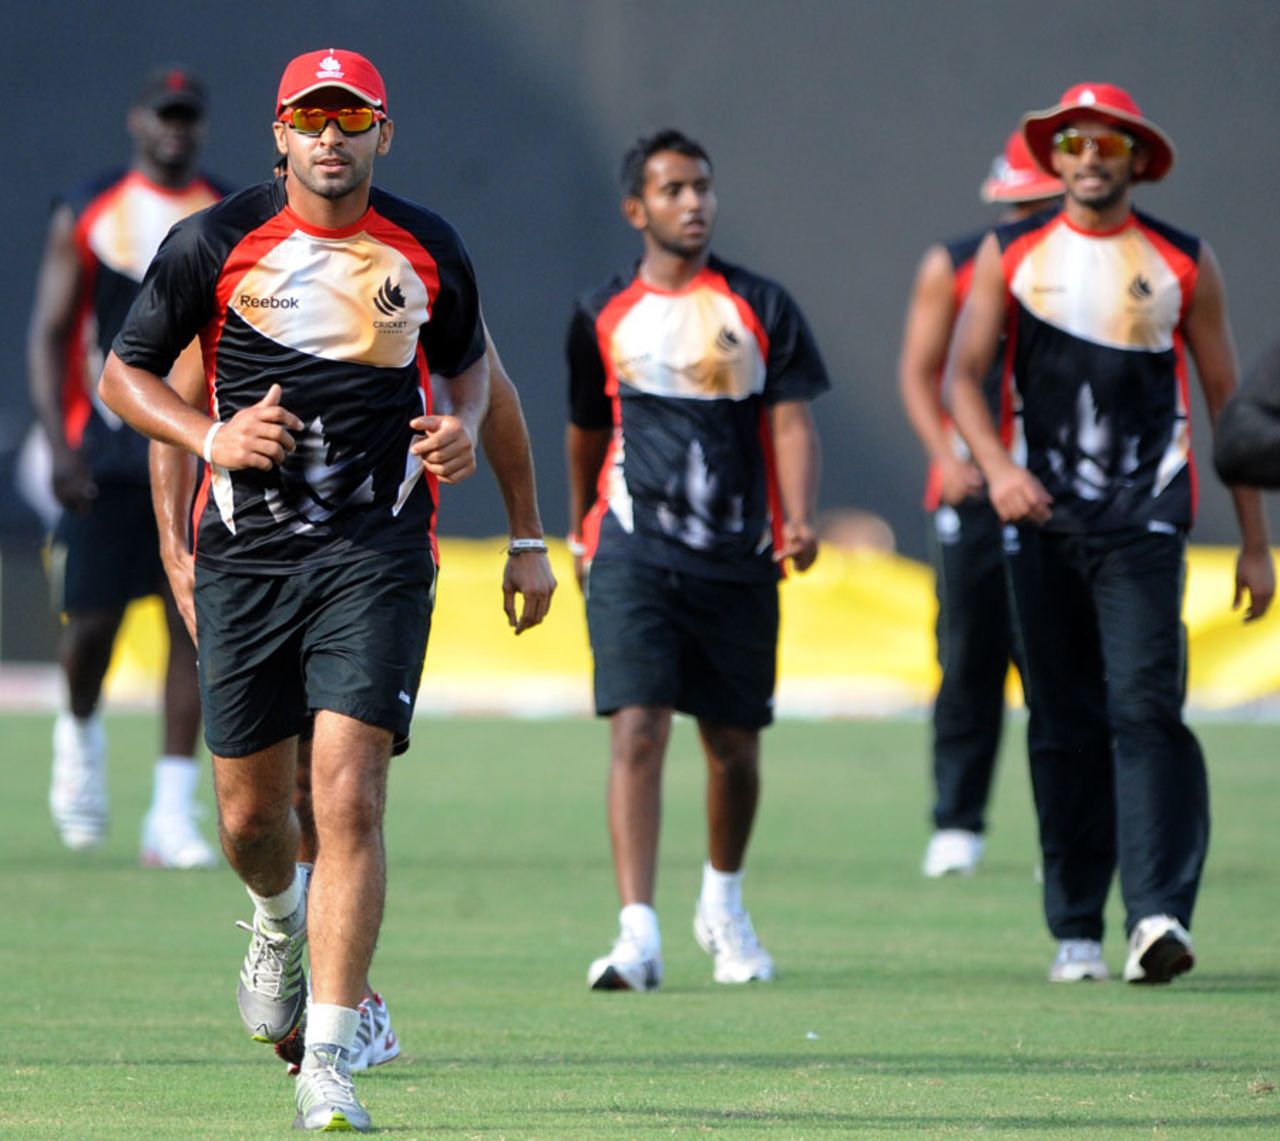 Canada captain Ashish Bagai and his team warm up during a training session, Colombo, March 2, 2011